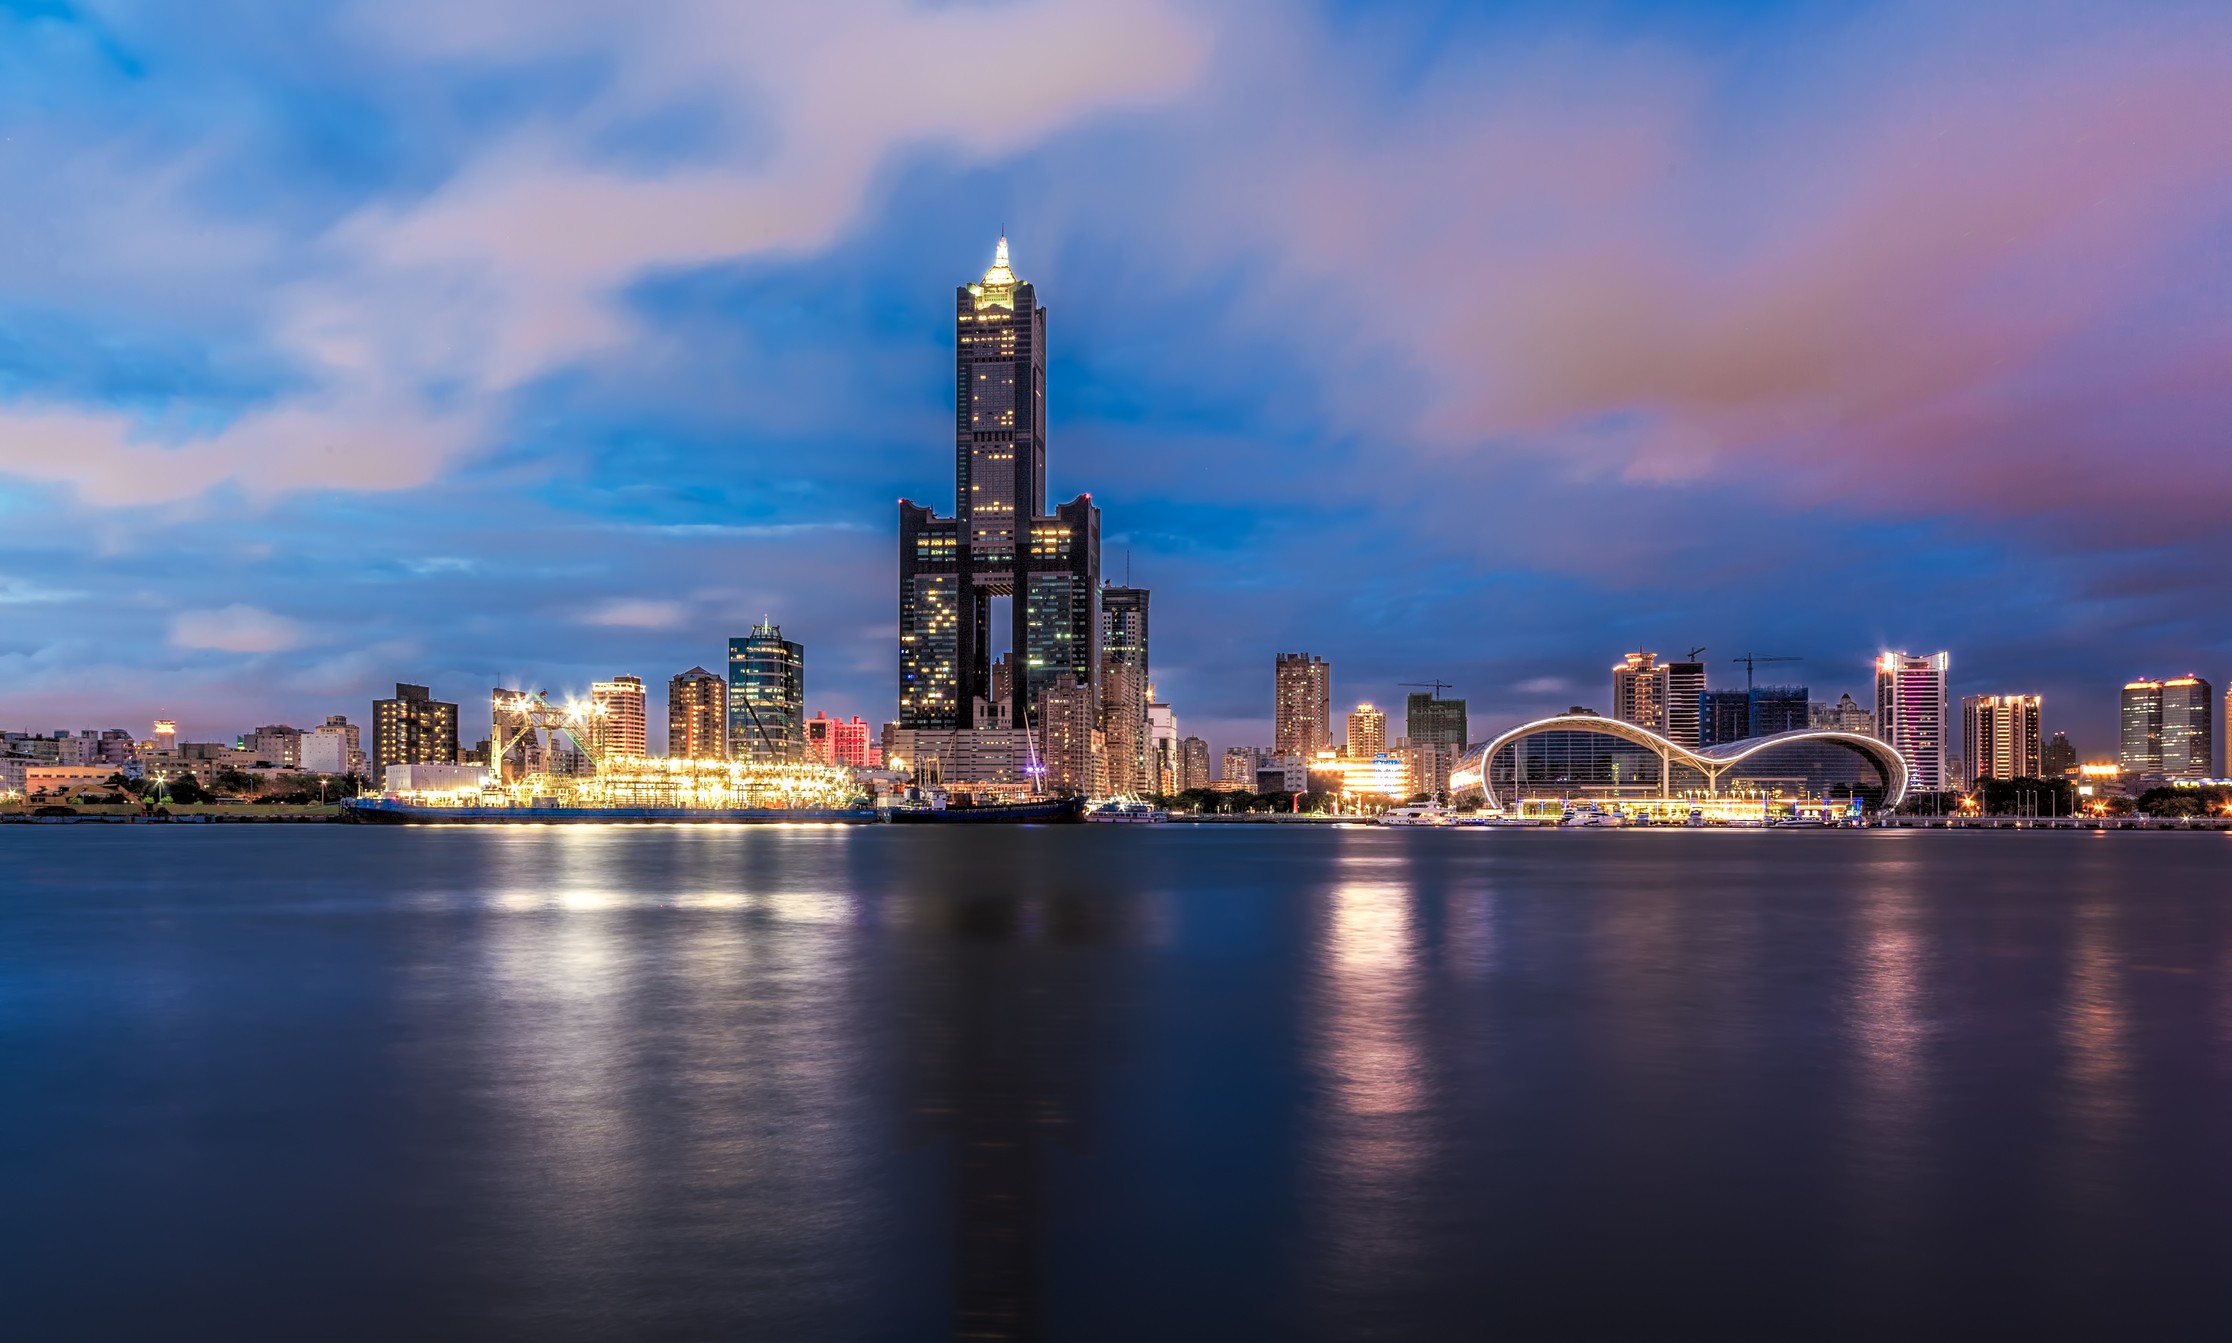 The Taiwanese port city of Kaohsiung has seen an increase in the number of visitors since the stunning victory of Kuomintang mayoral candidate Han Kuo-yu in last November’s election. Photo: Tourism Bureau of Kaohsiung City Government